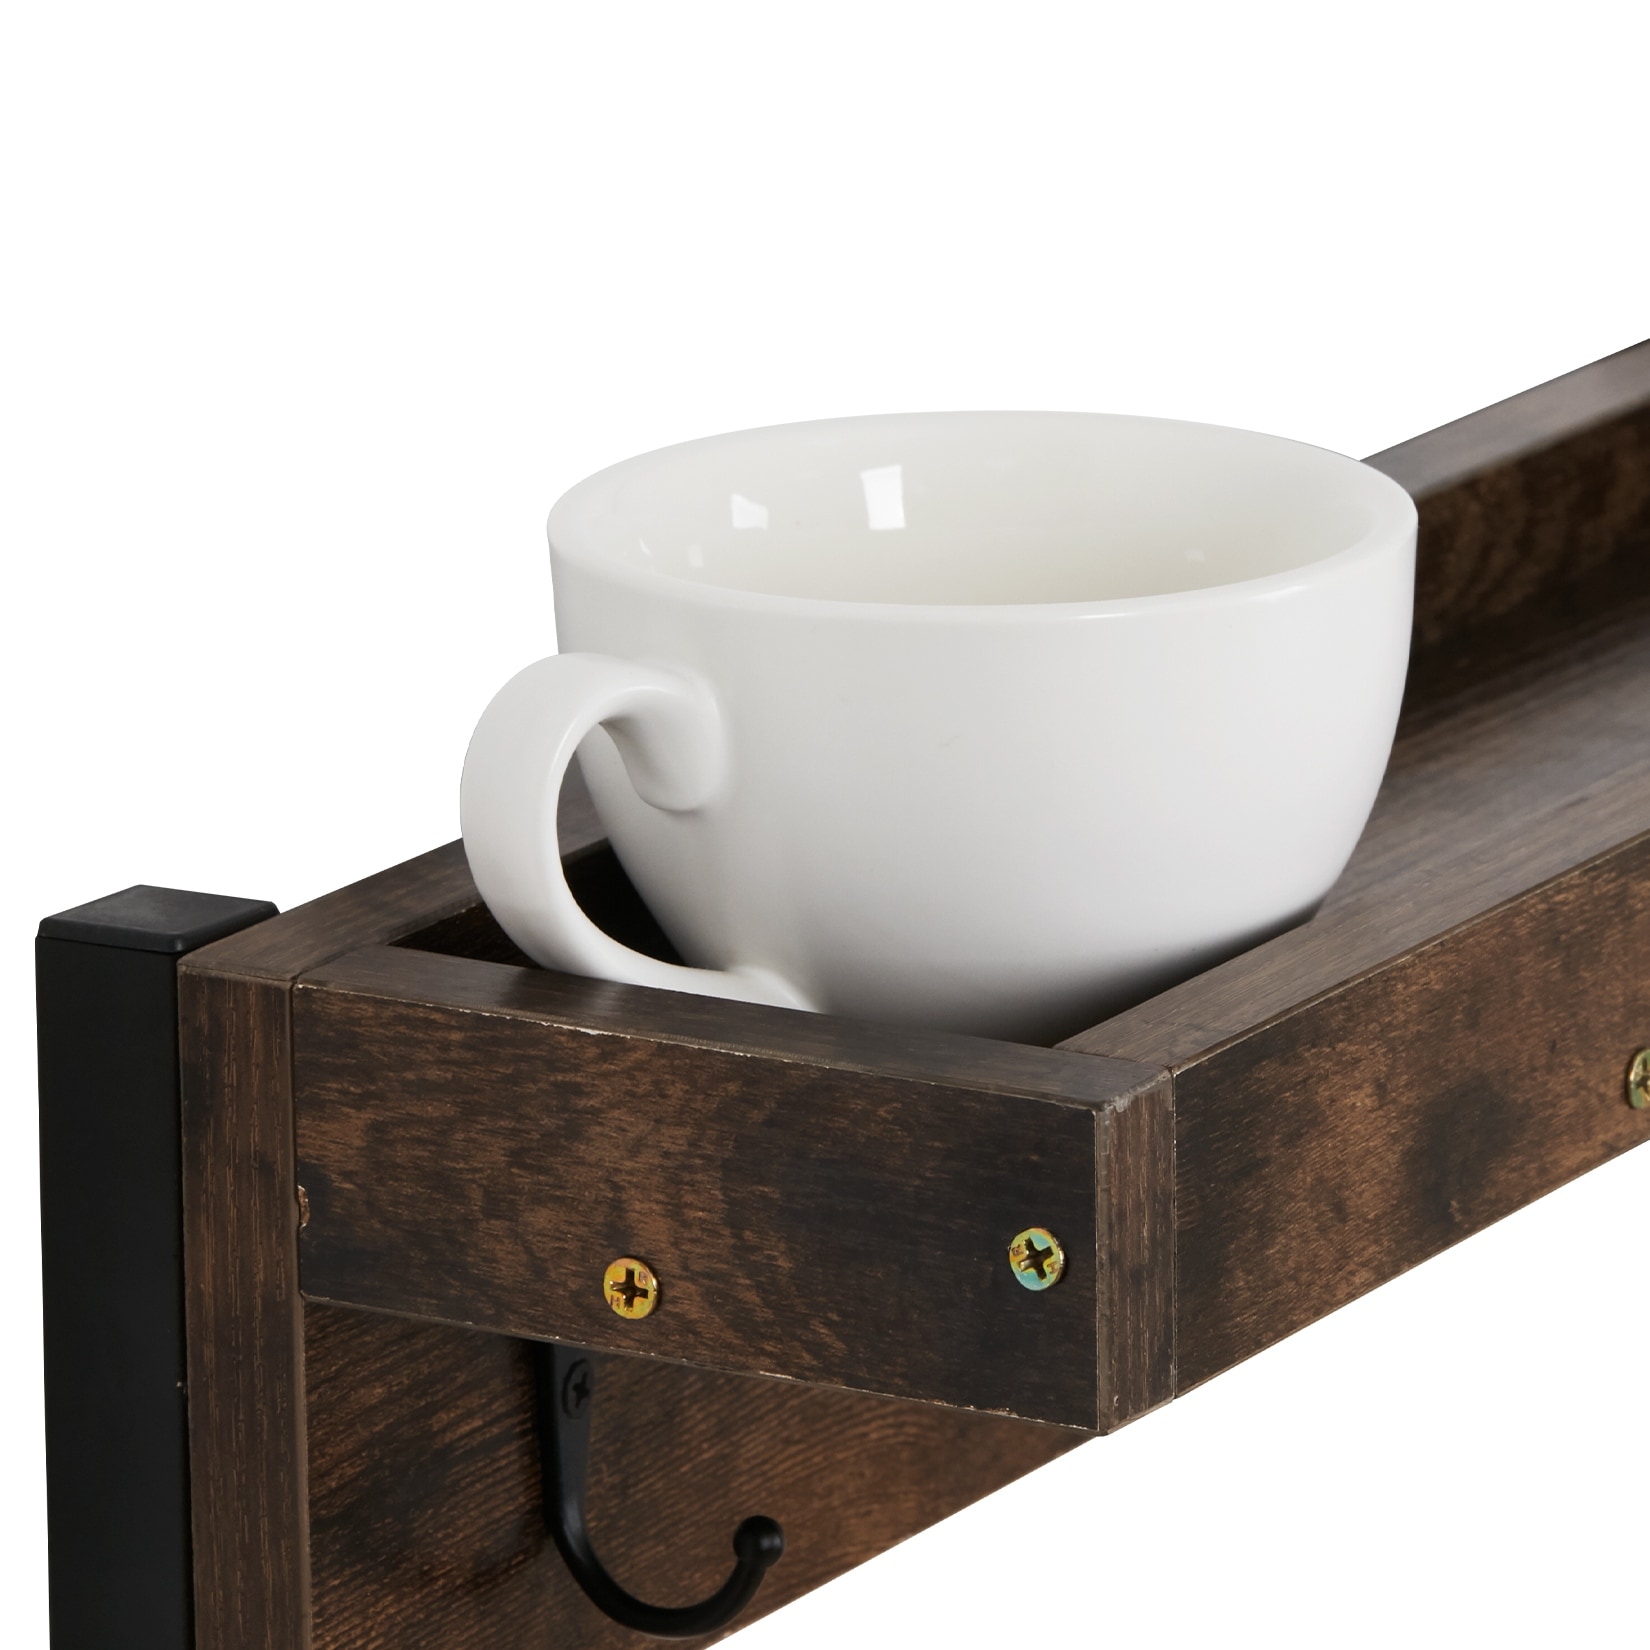 https://ak1.ostkcdn.com/images/products/is/images/direct/4a089a6e74d8565f4bb199a74e0fce15dea0ca0c/Wood-Rustic-Coffee-Mug-Holder-Rack-Wall-Mounted-Coffee-Cup-Shelf.jpg